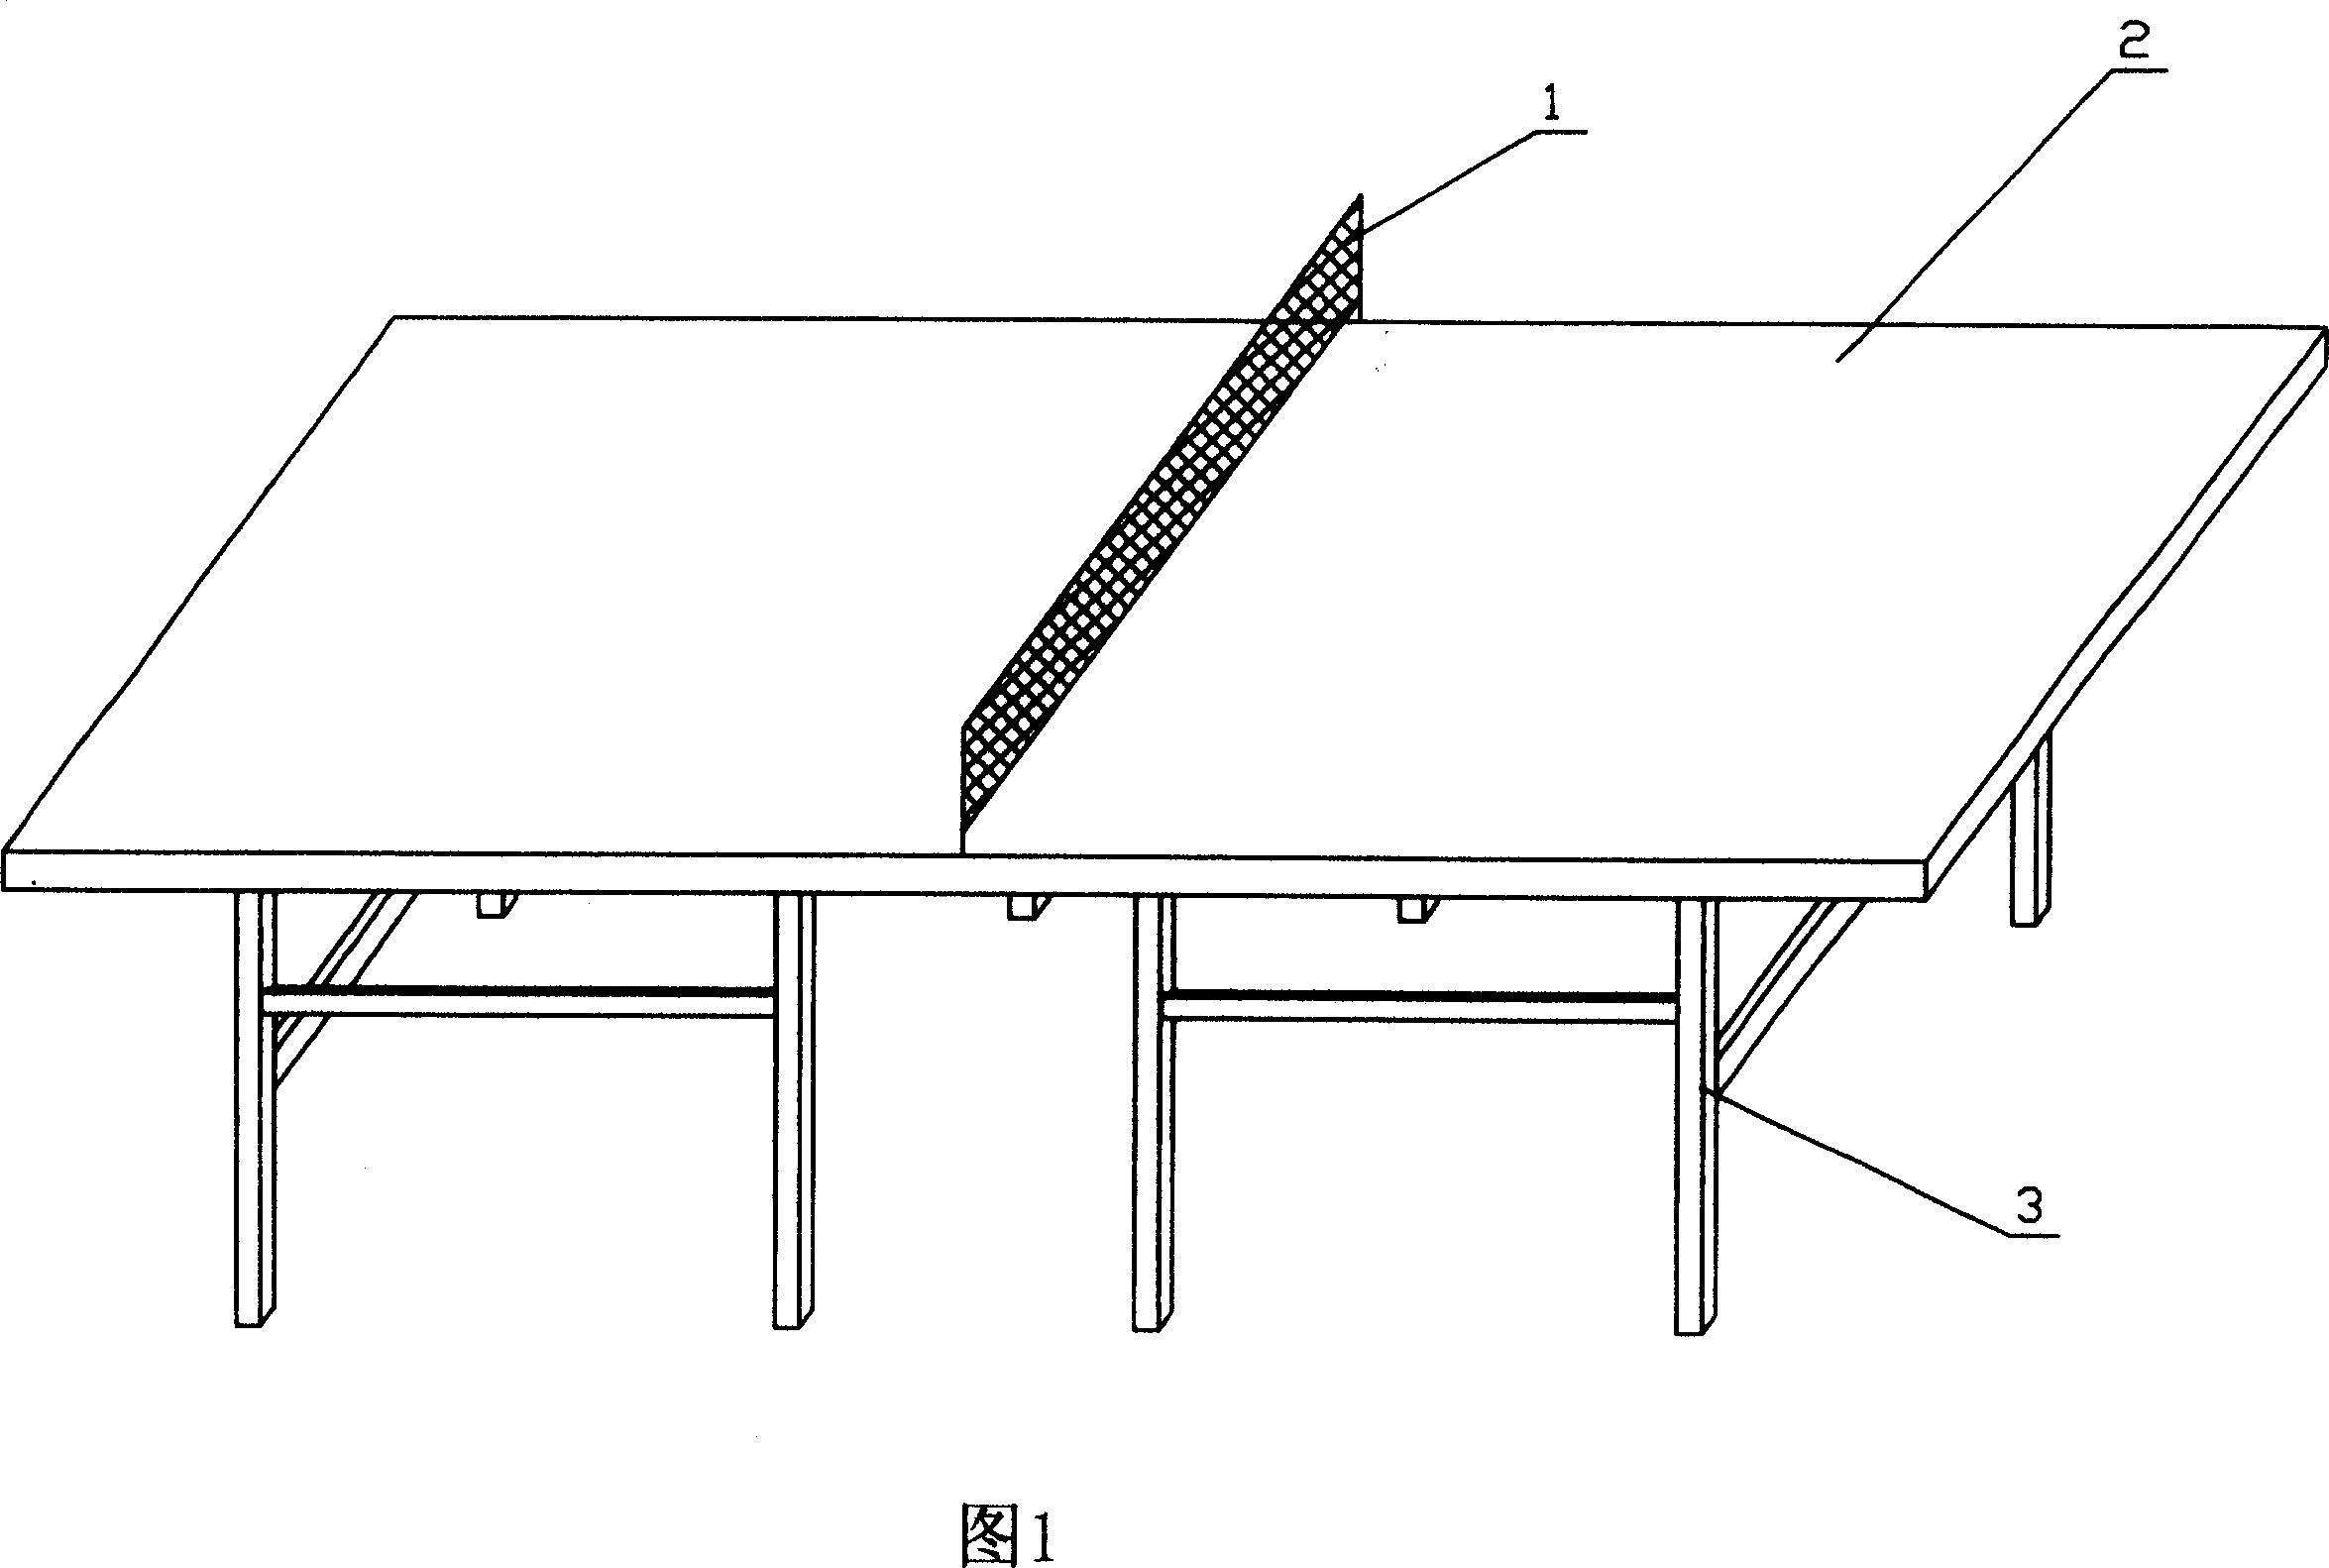 Method for not changing route of edge-wiping ball in standard ping-pong table and table in the method